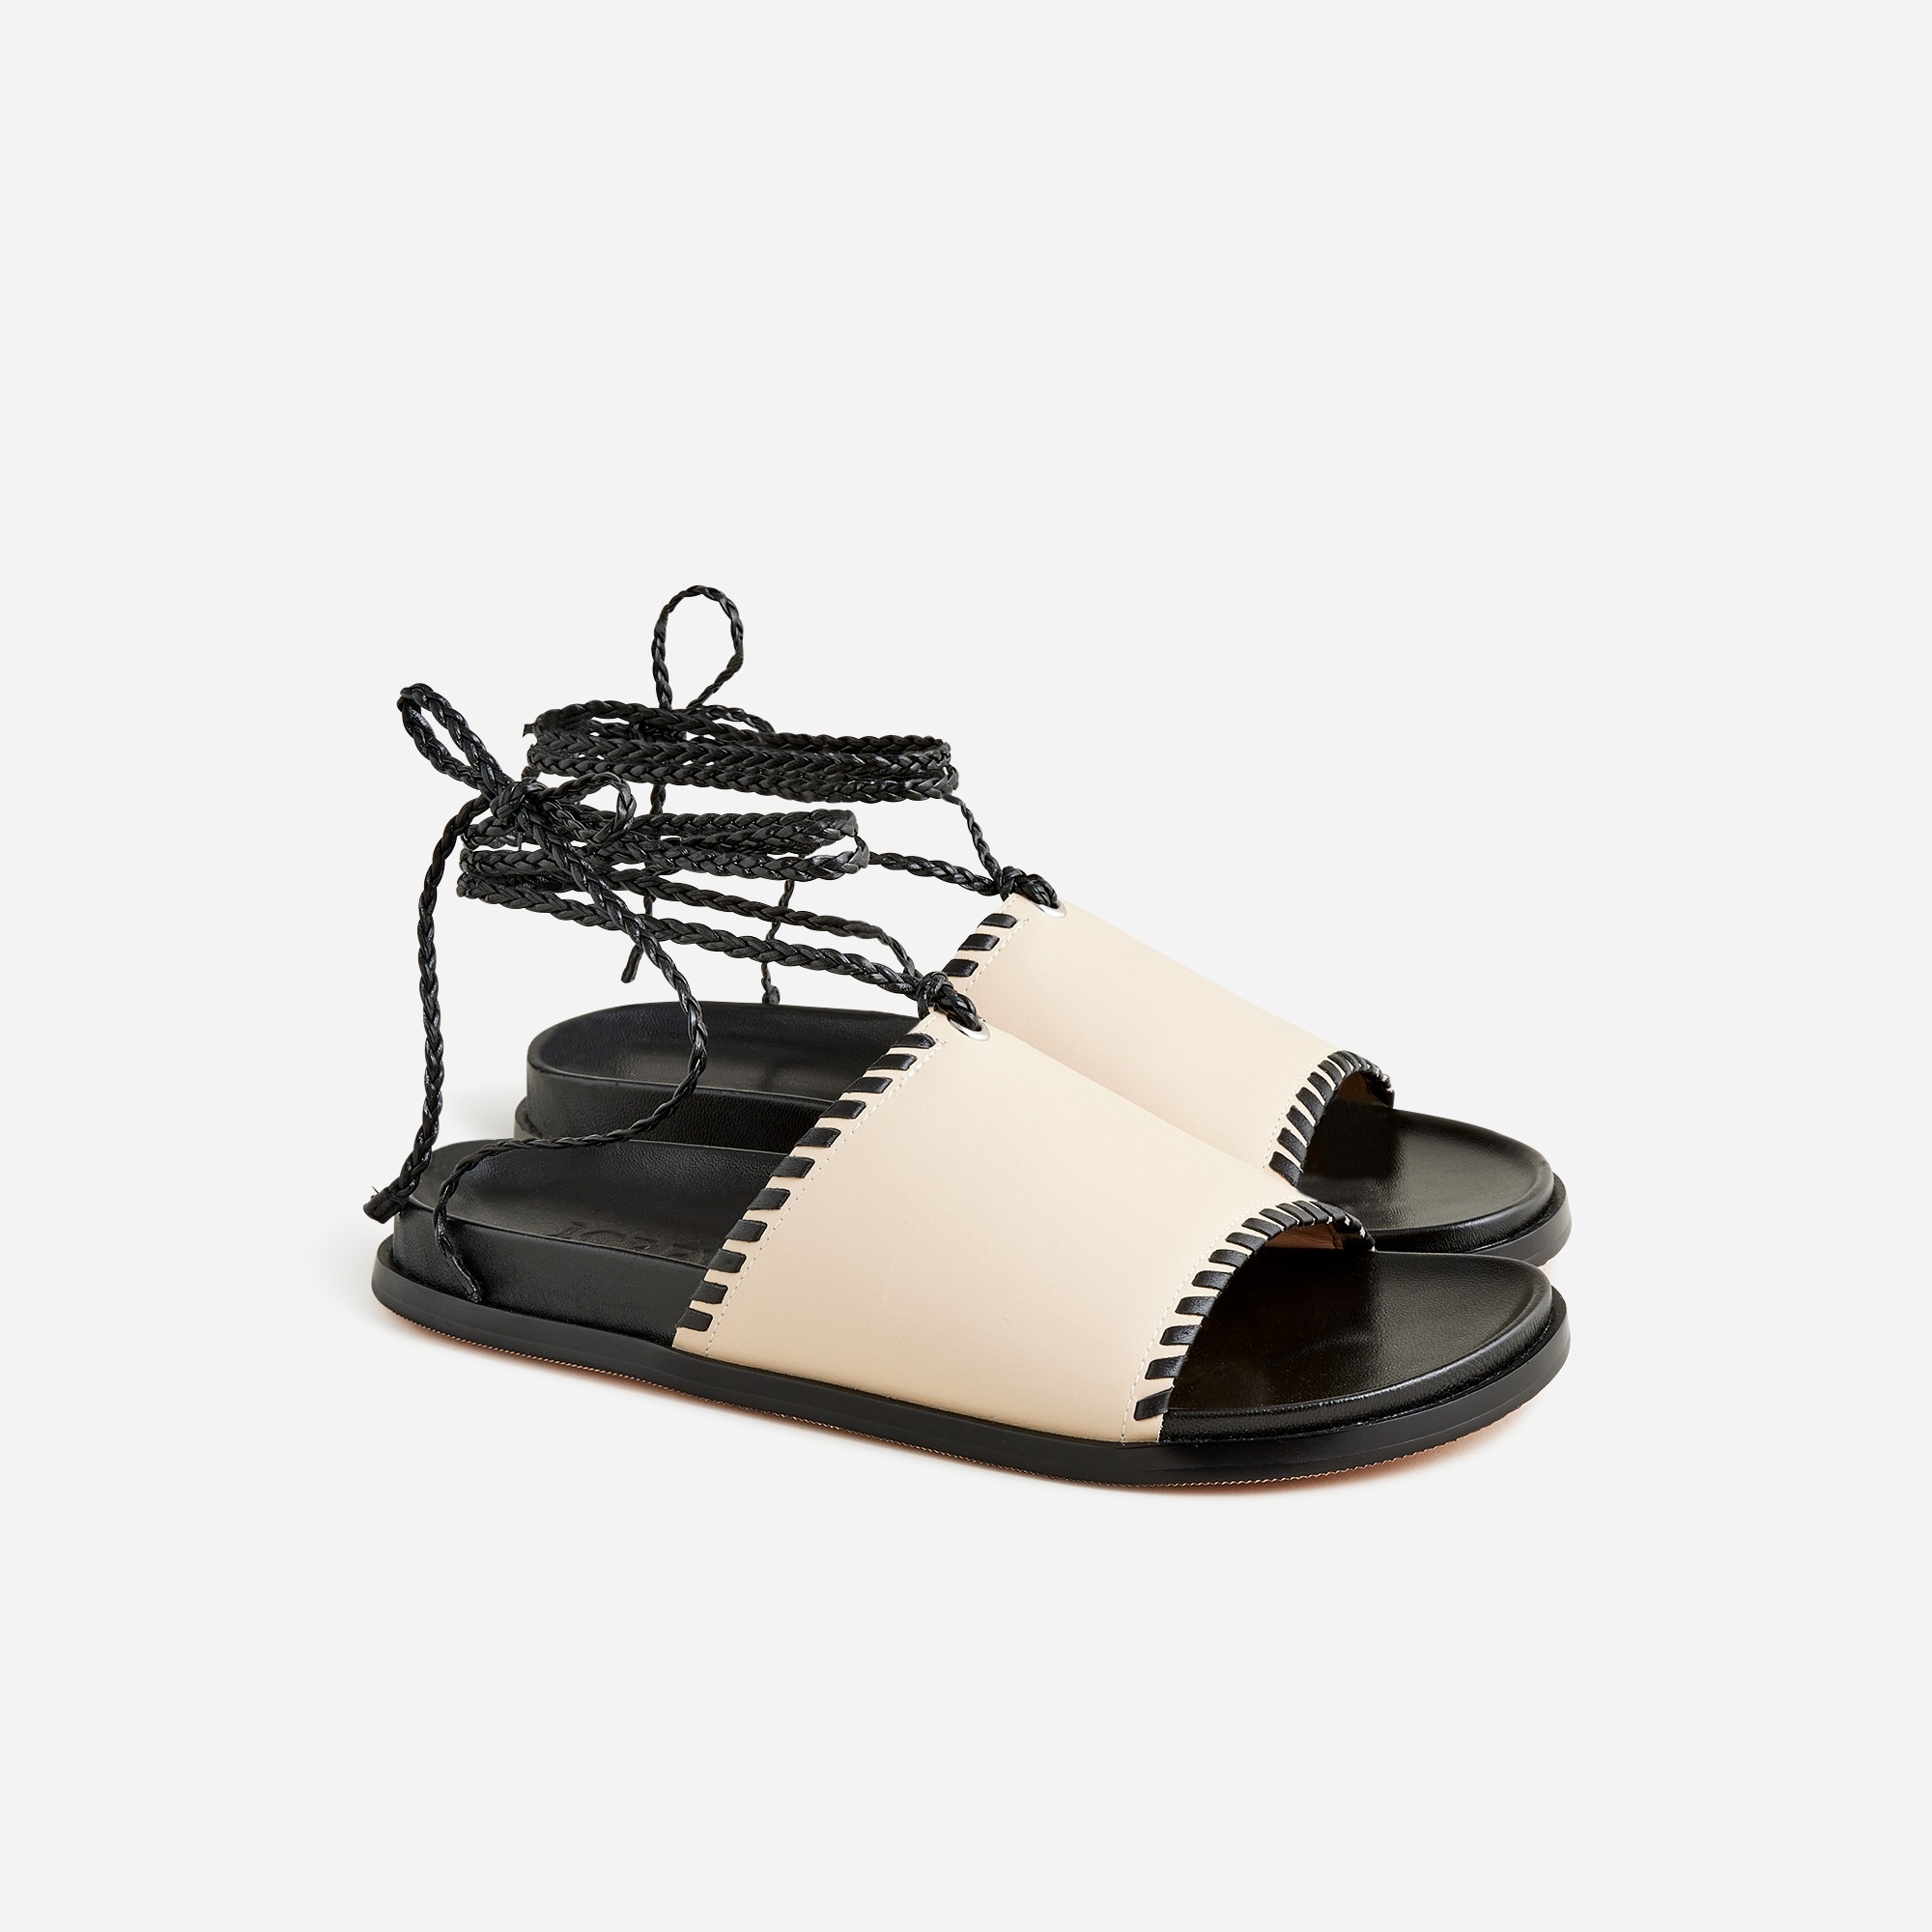 Jcrew Colbie braided lace-up sandals in leather